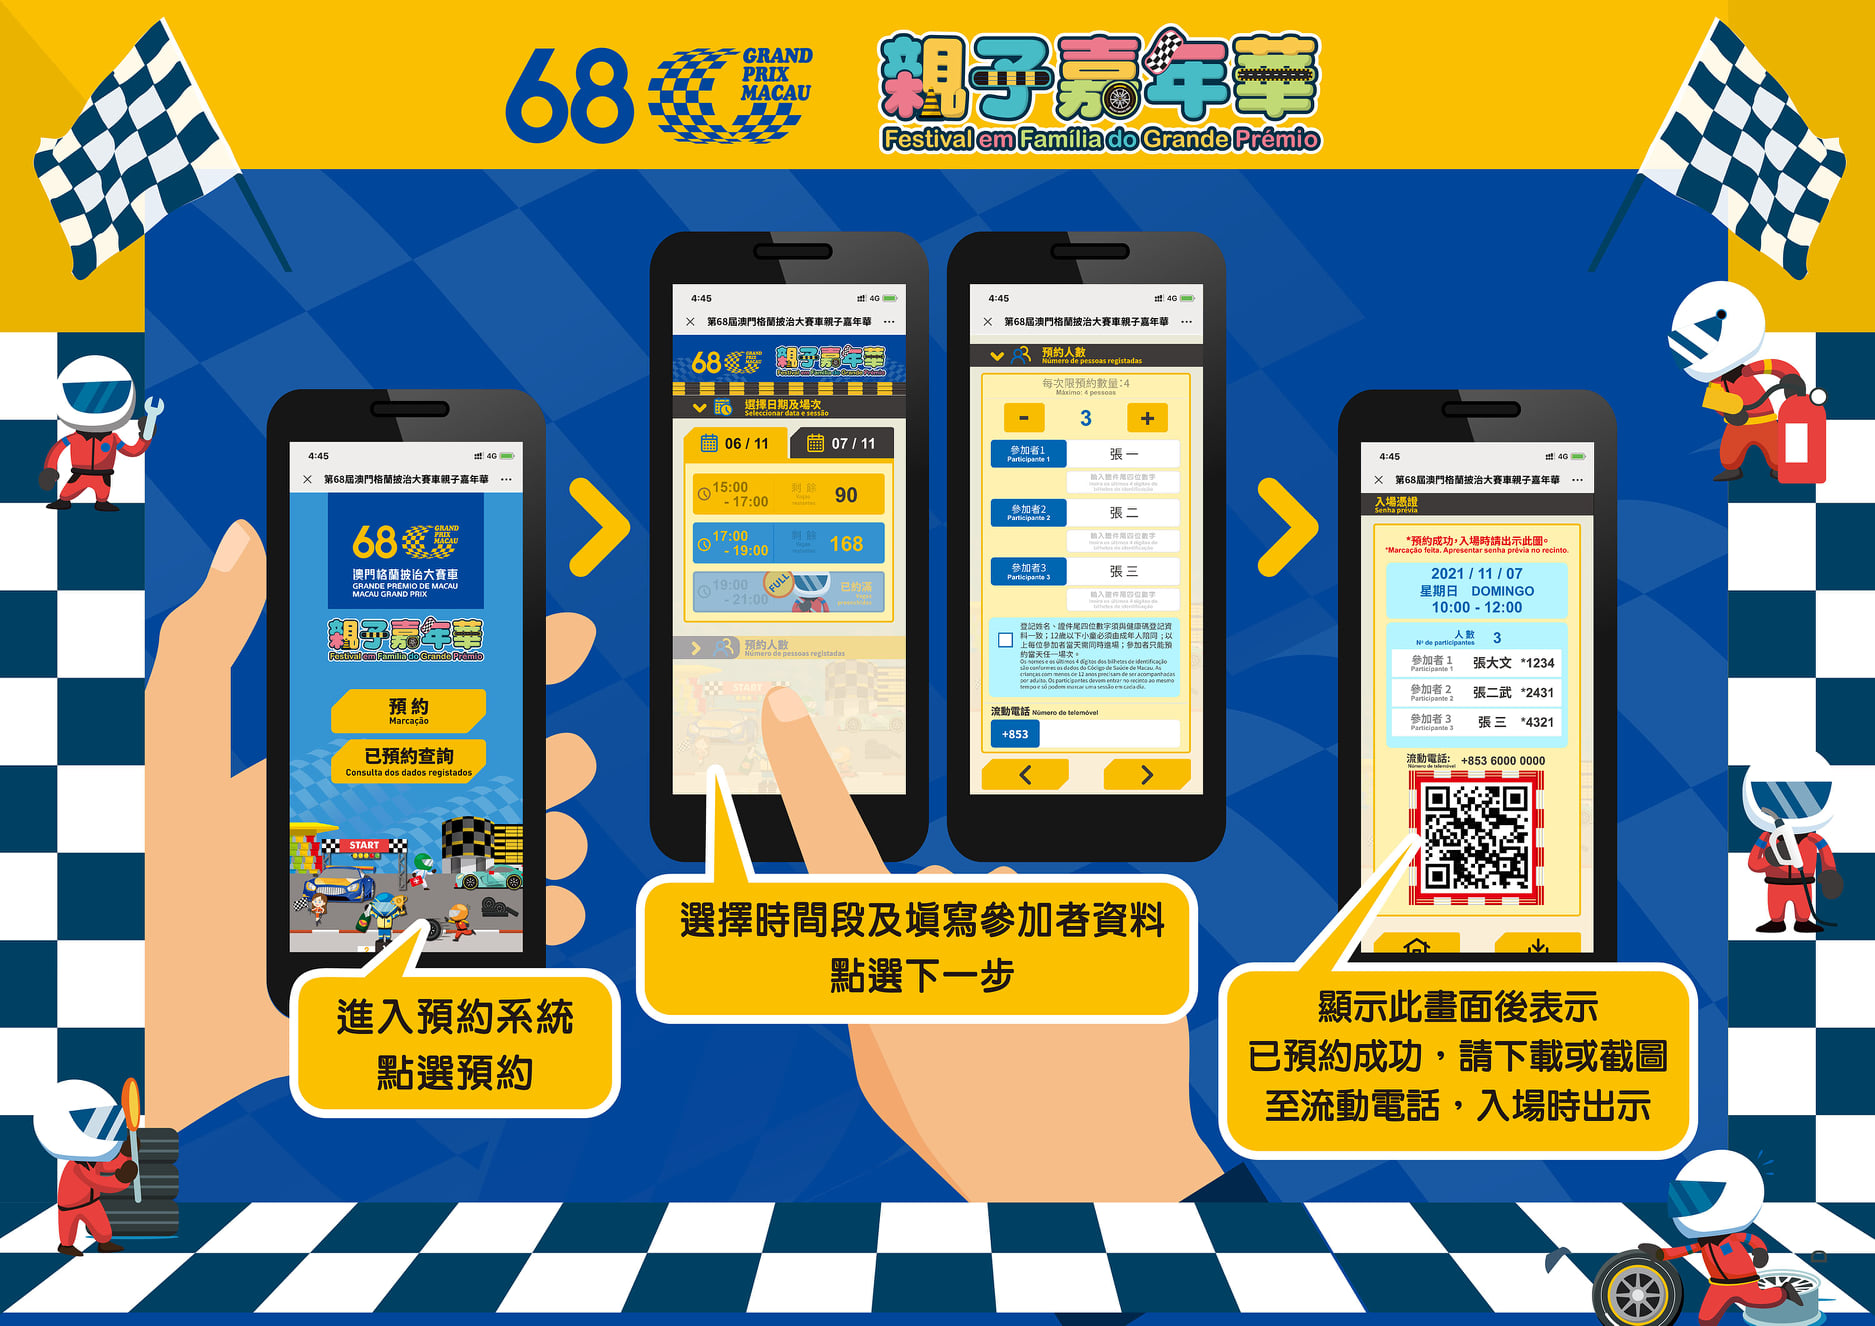 Online booking for 68th Macau Grand Prix Family Carnival open